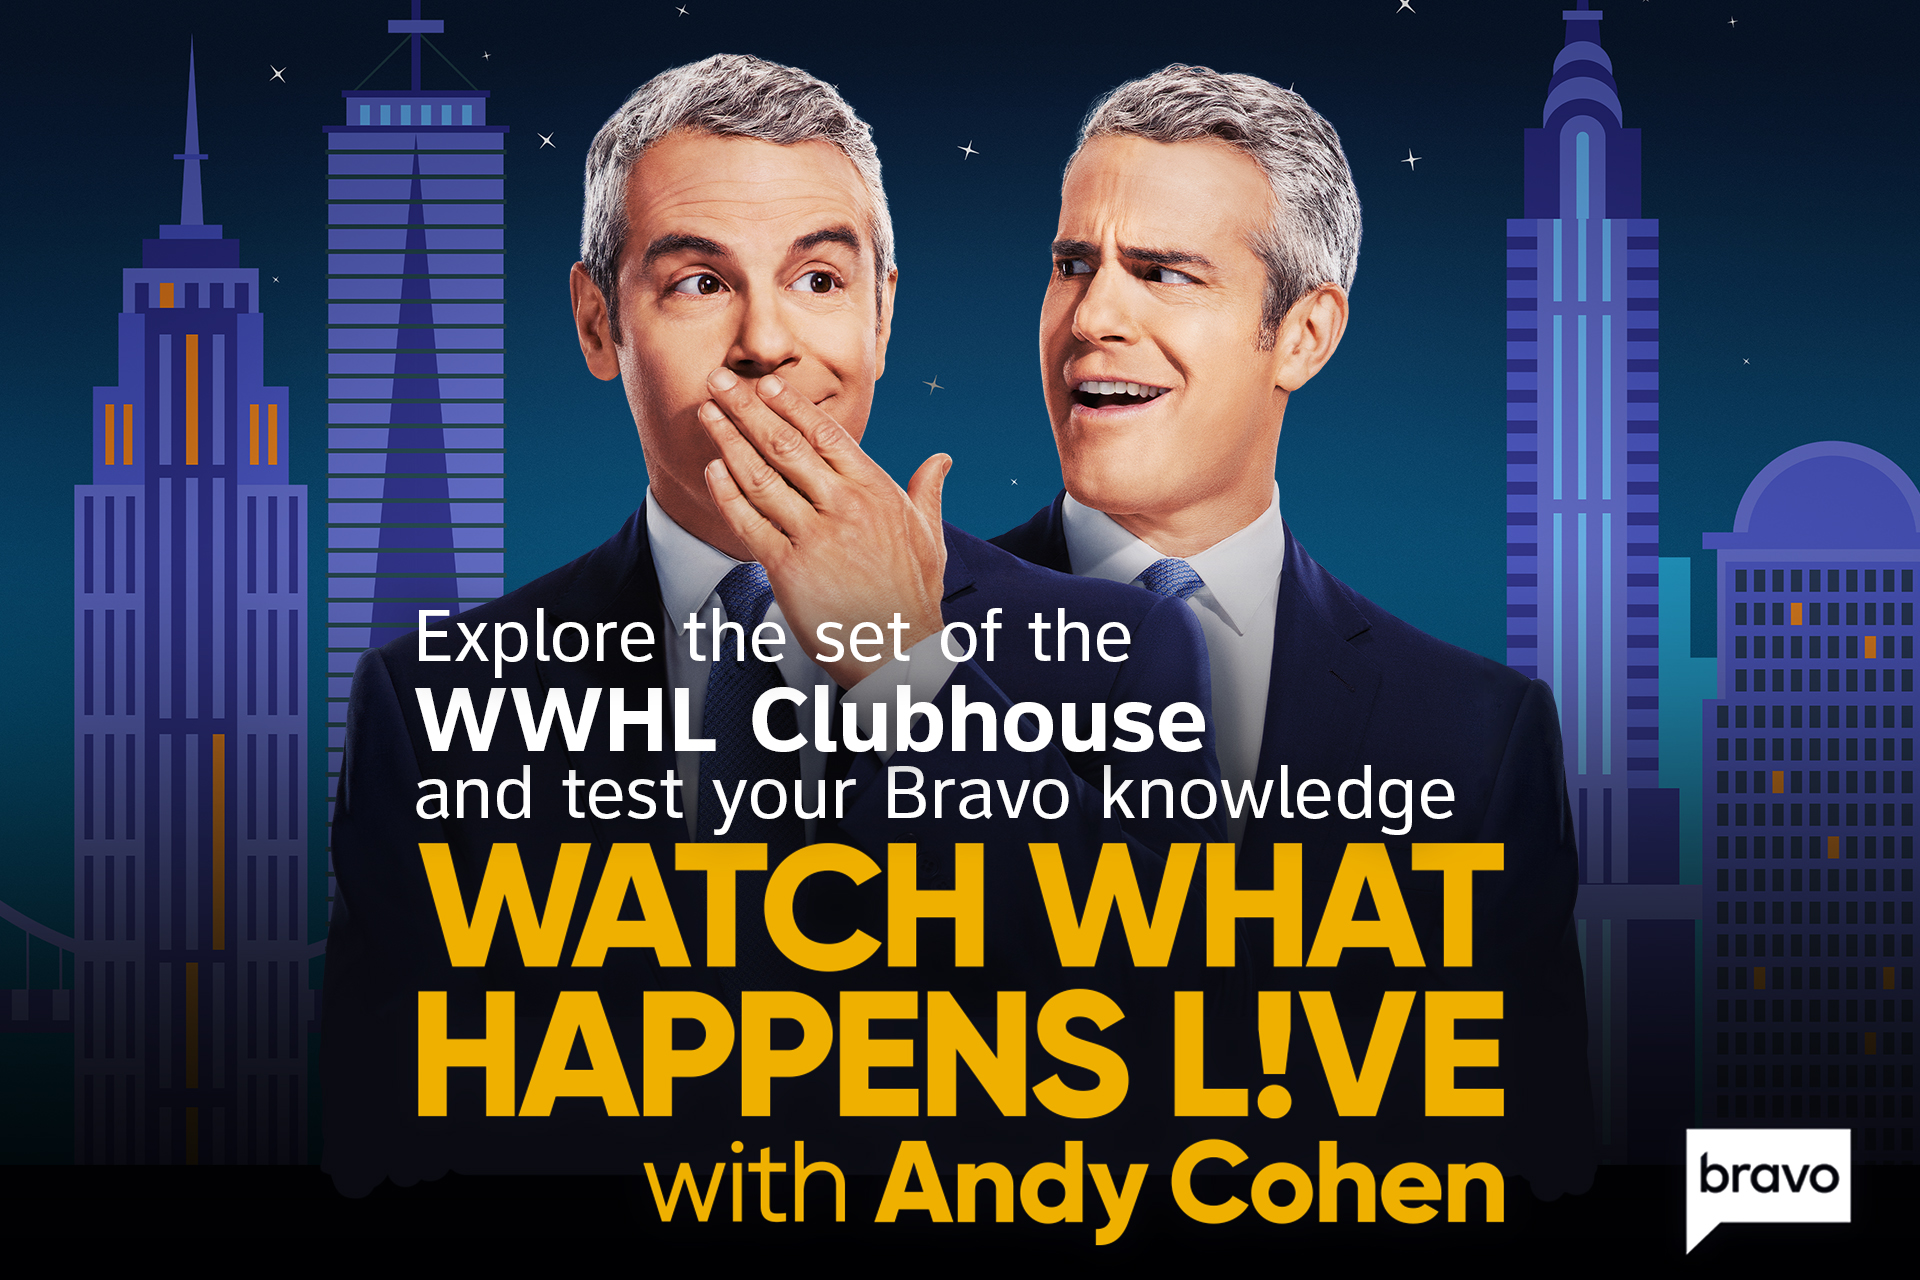 DIRECTV And Cox Launch AR Version of Watch What Happens Live with Andy Cohen